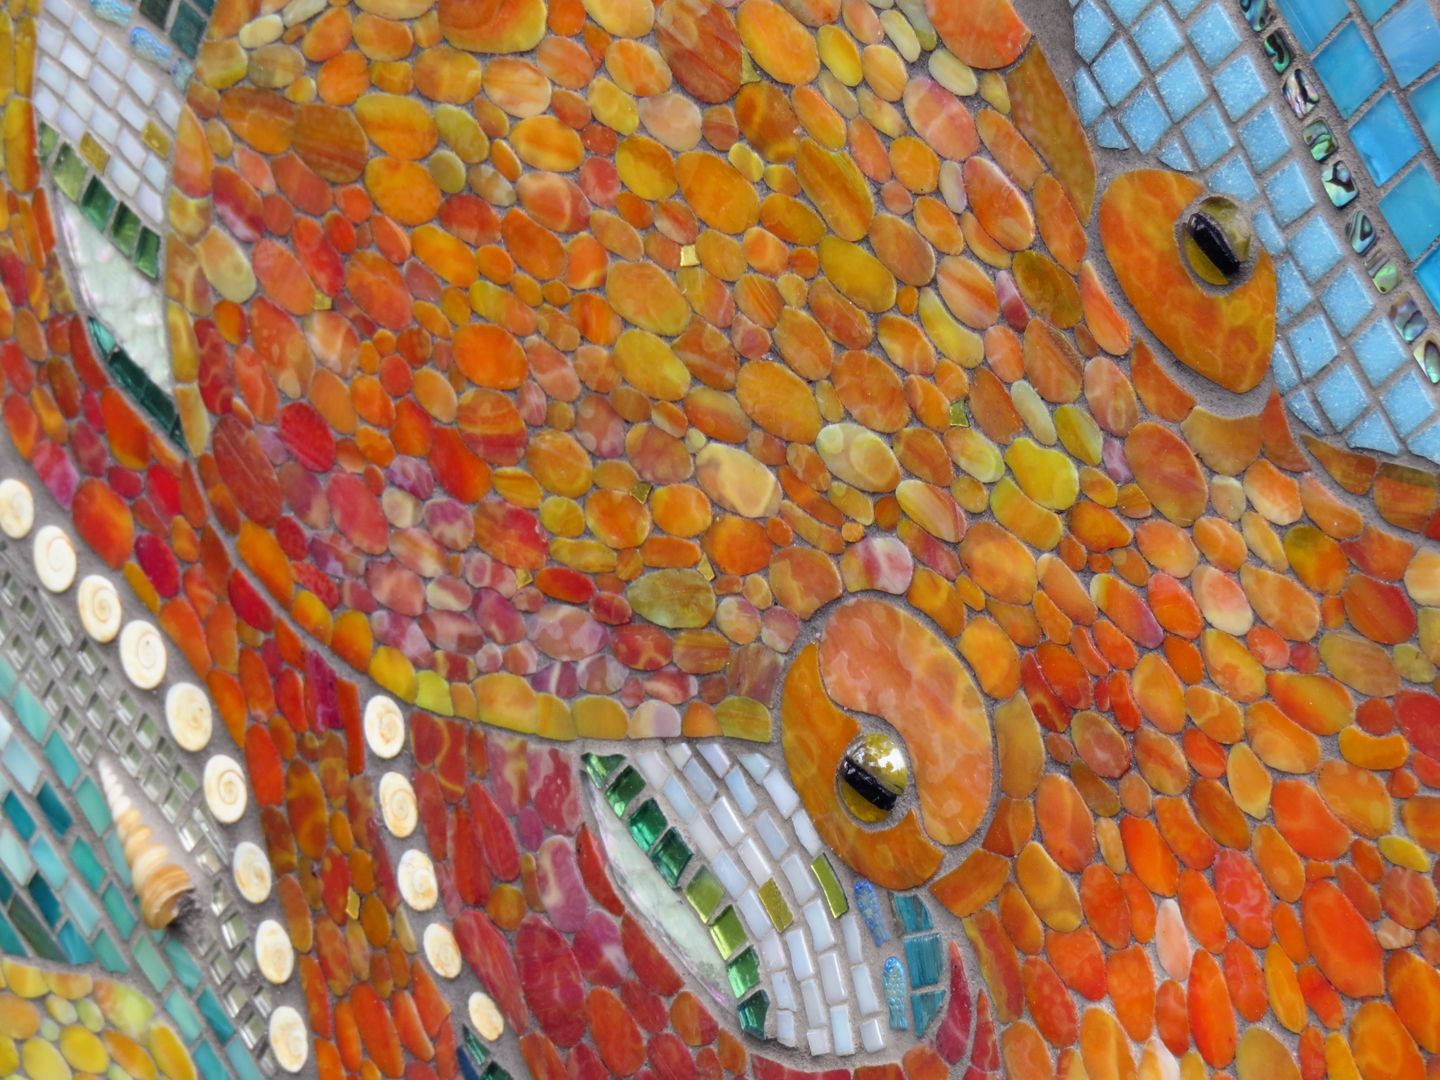 Buy Custom Made Octopus Mosaic, made to order from Made for Mosaics